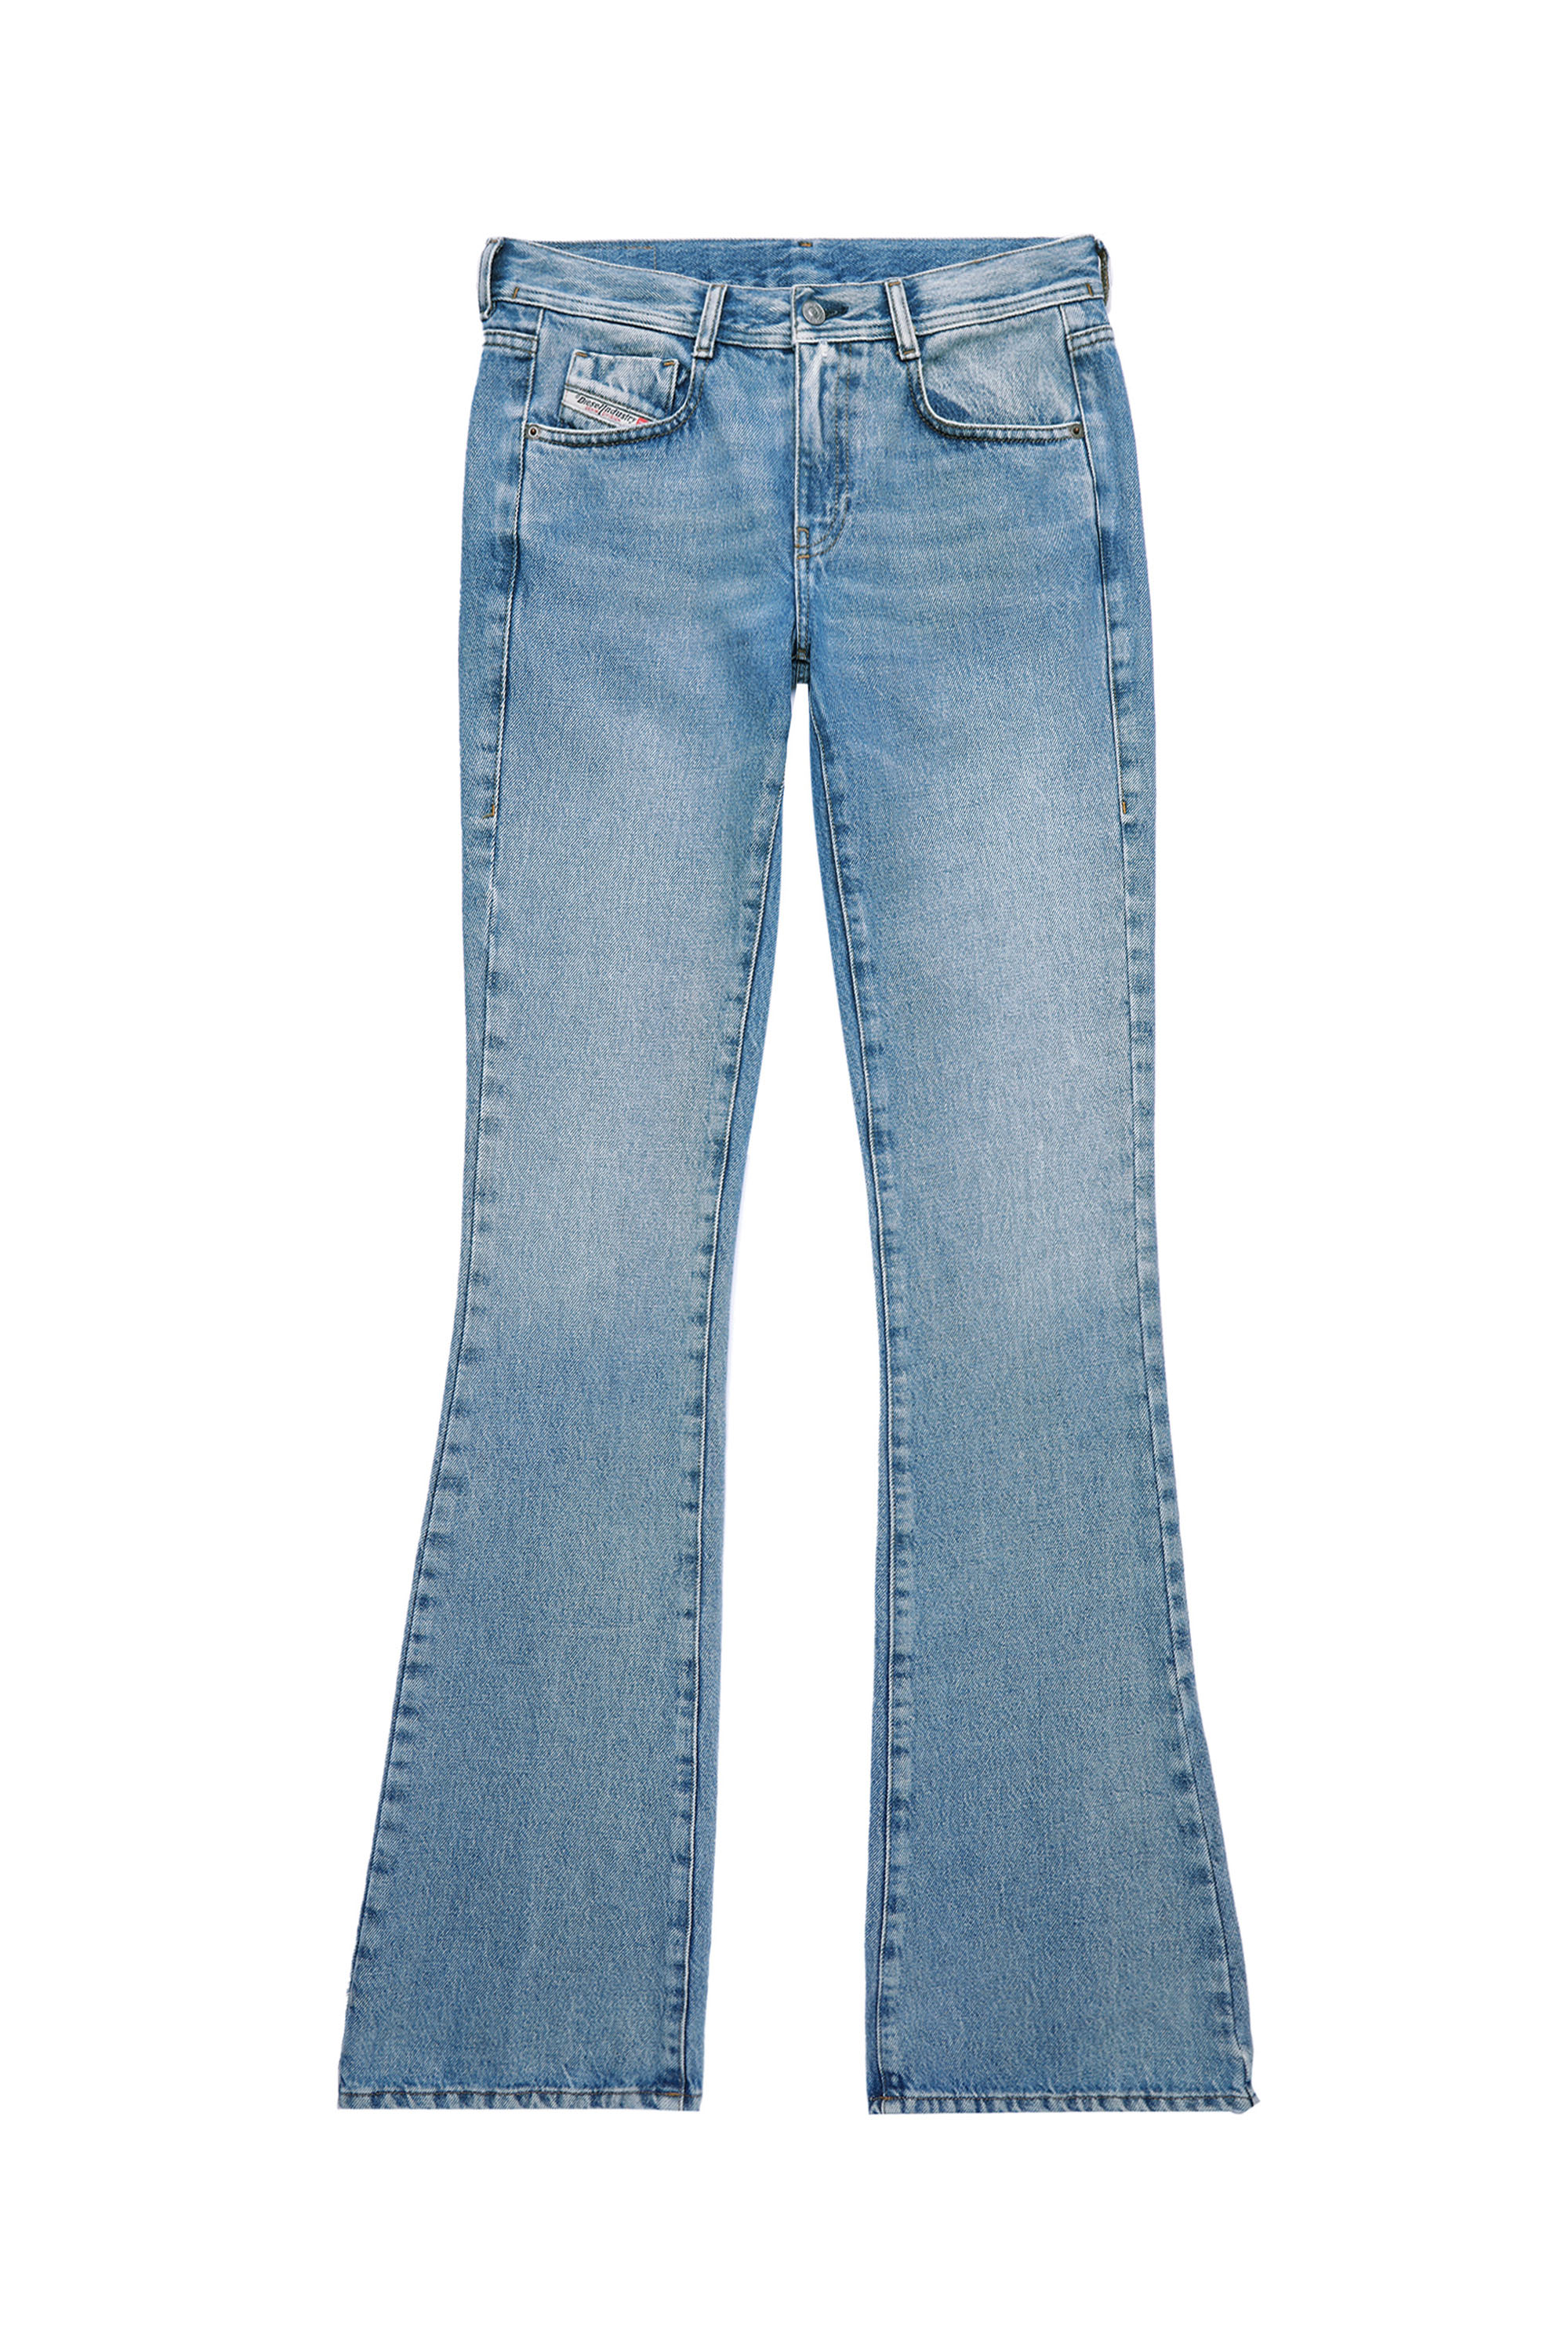 1969 D-EBBEY 09C16 Bootcut and Flare Jeans, Medium blue - Jeans